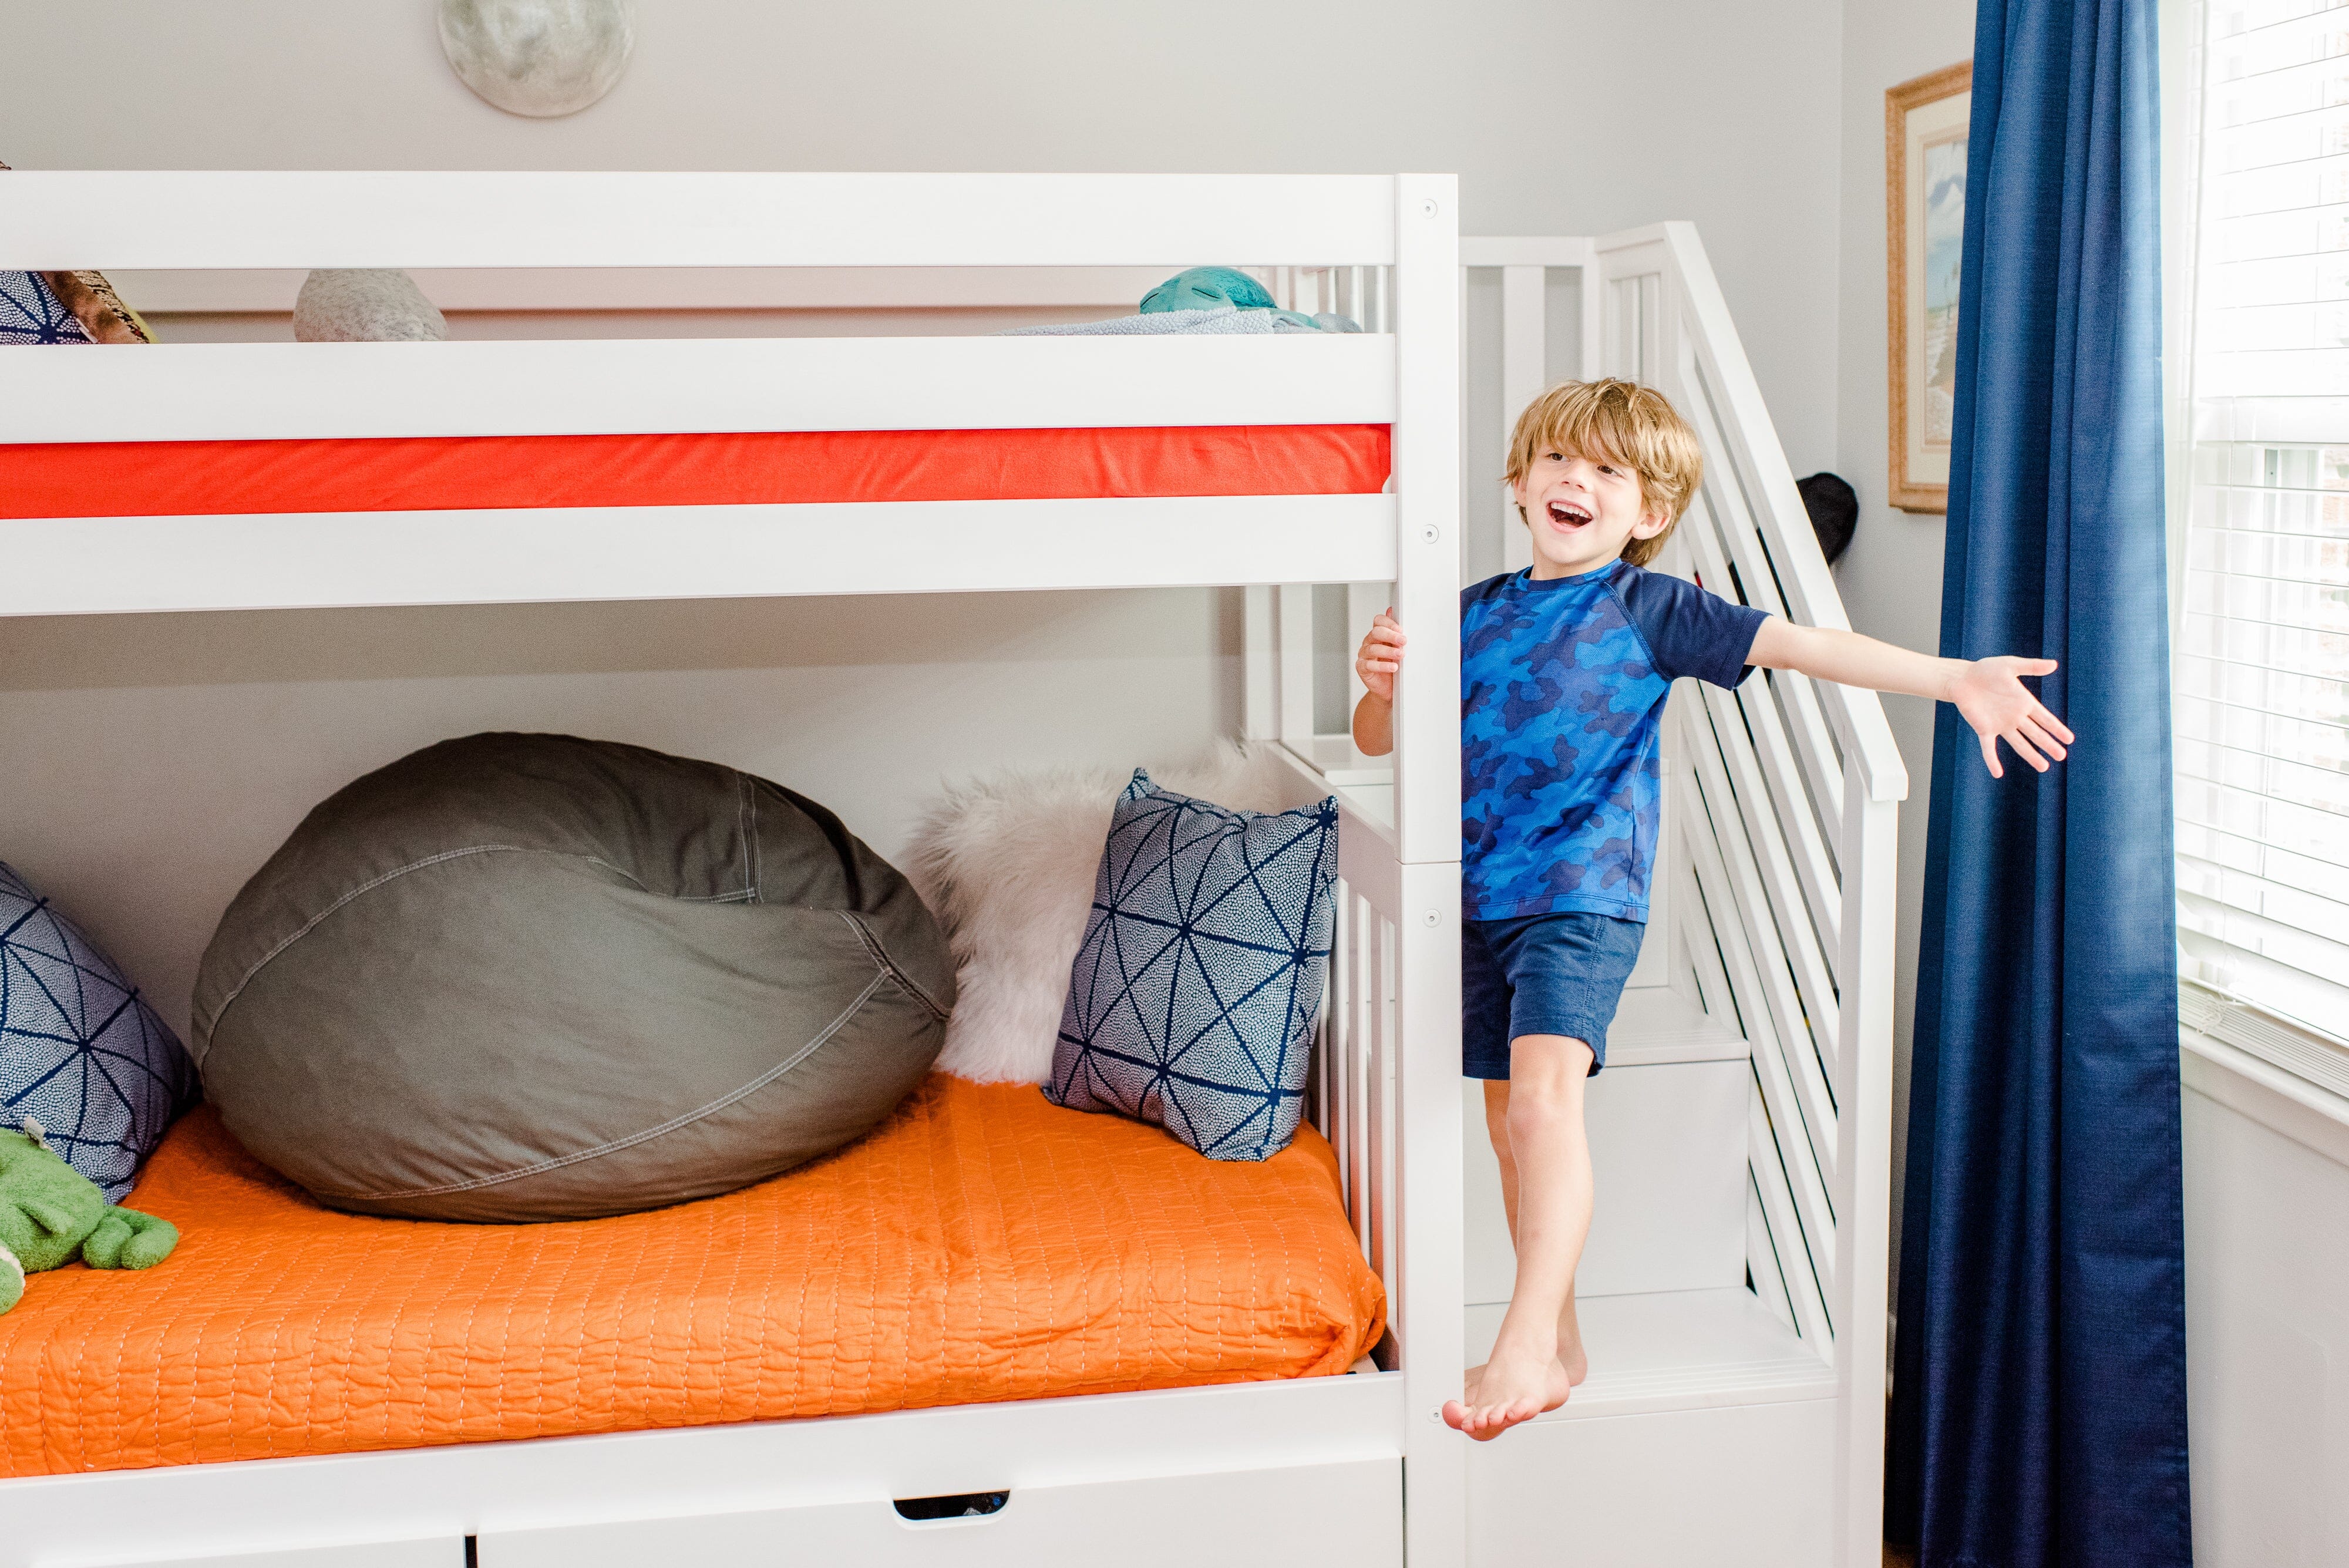 Winter Deals Are Here! Save On Kid’s Beds, Bunks, Lofts